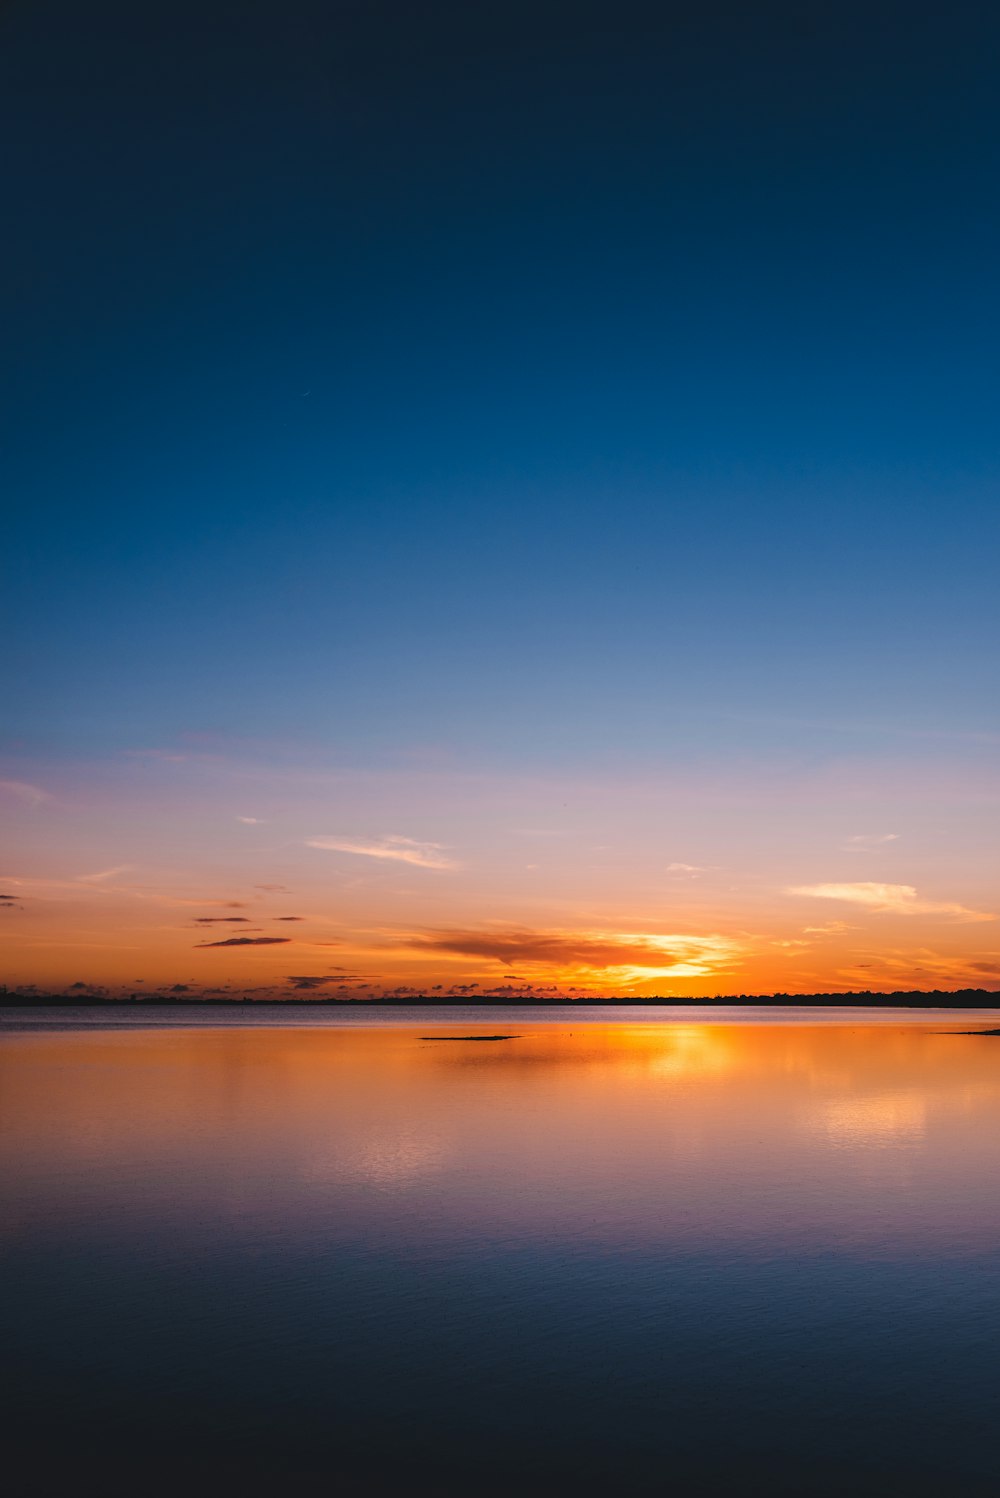 orange and blue sky with calm body of water